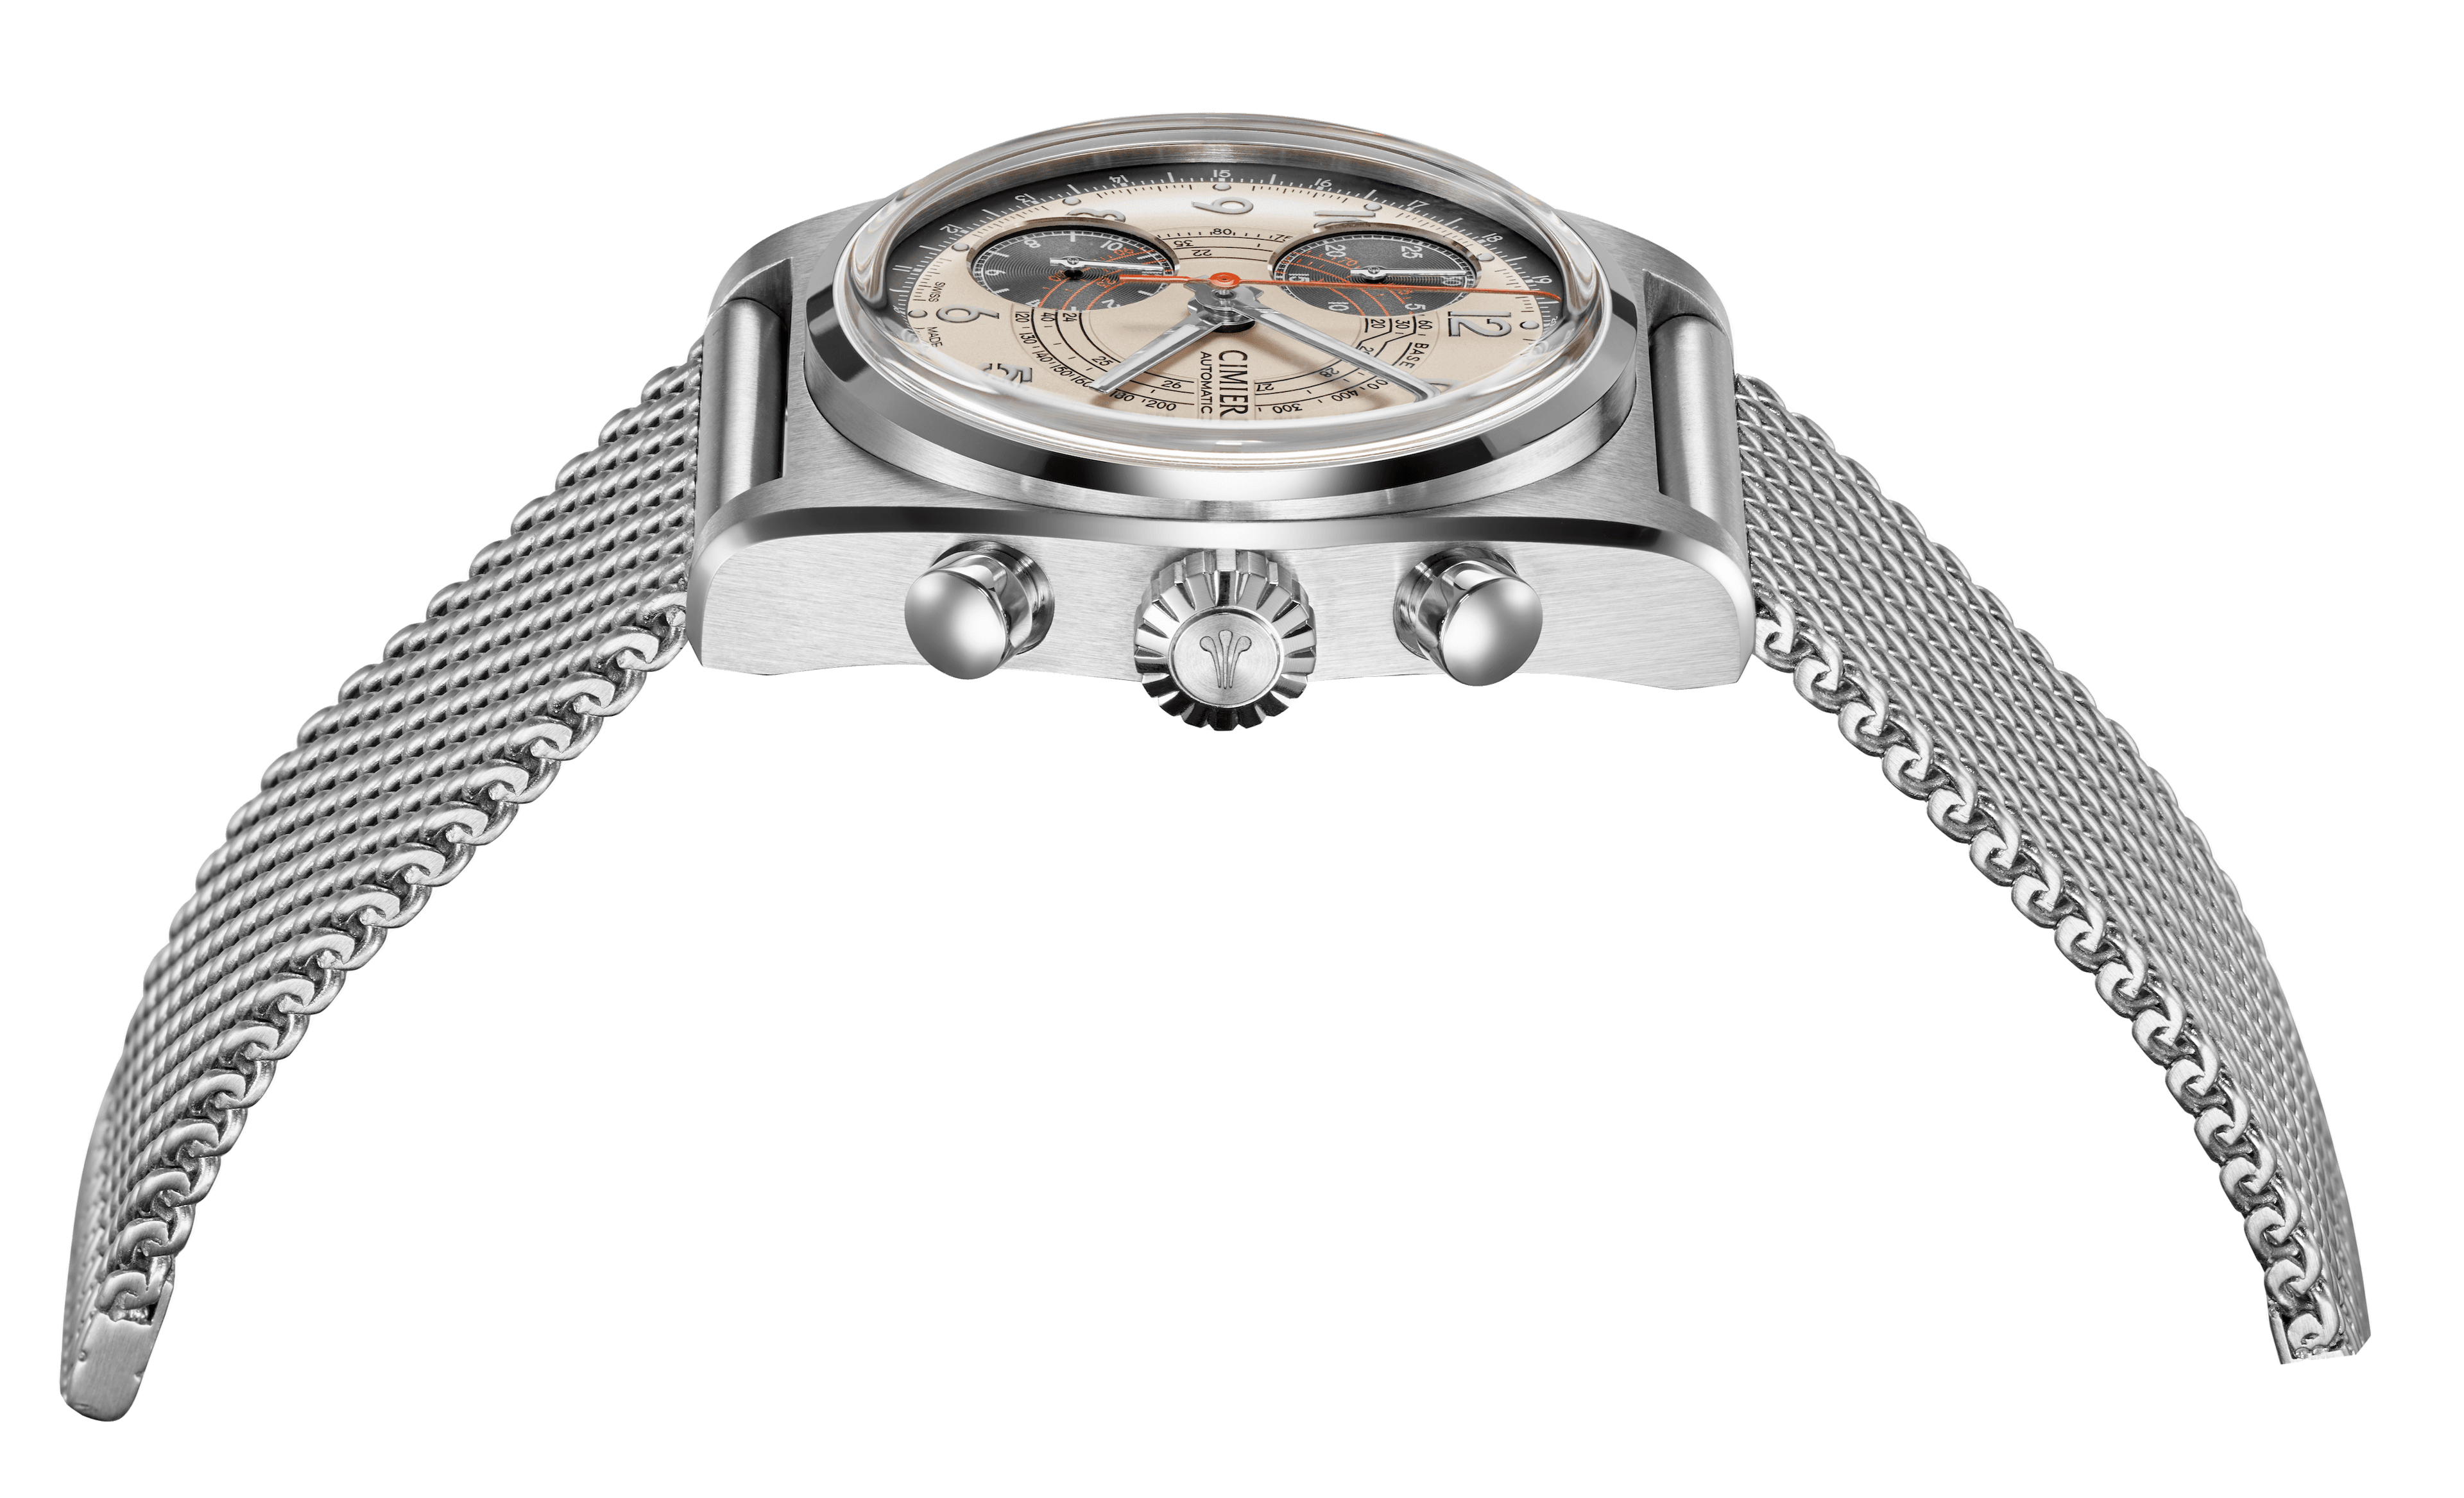 Profile of Cimier 711 Heritage Chronograph wristwatch with white dial